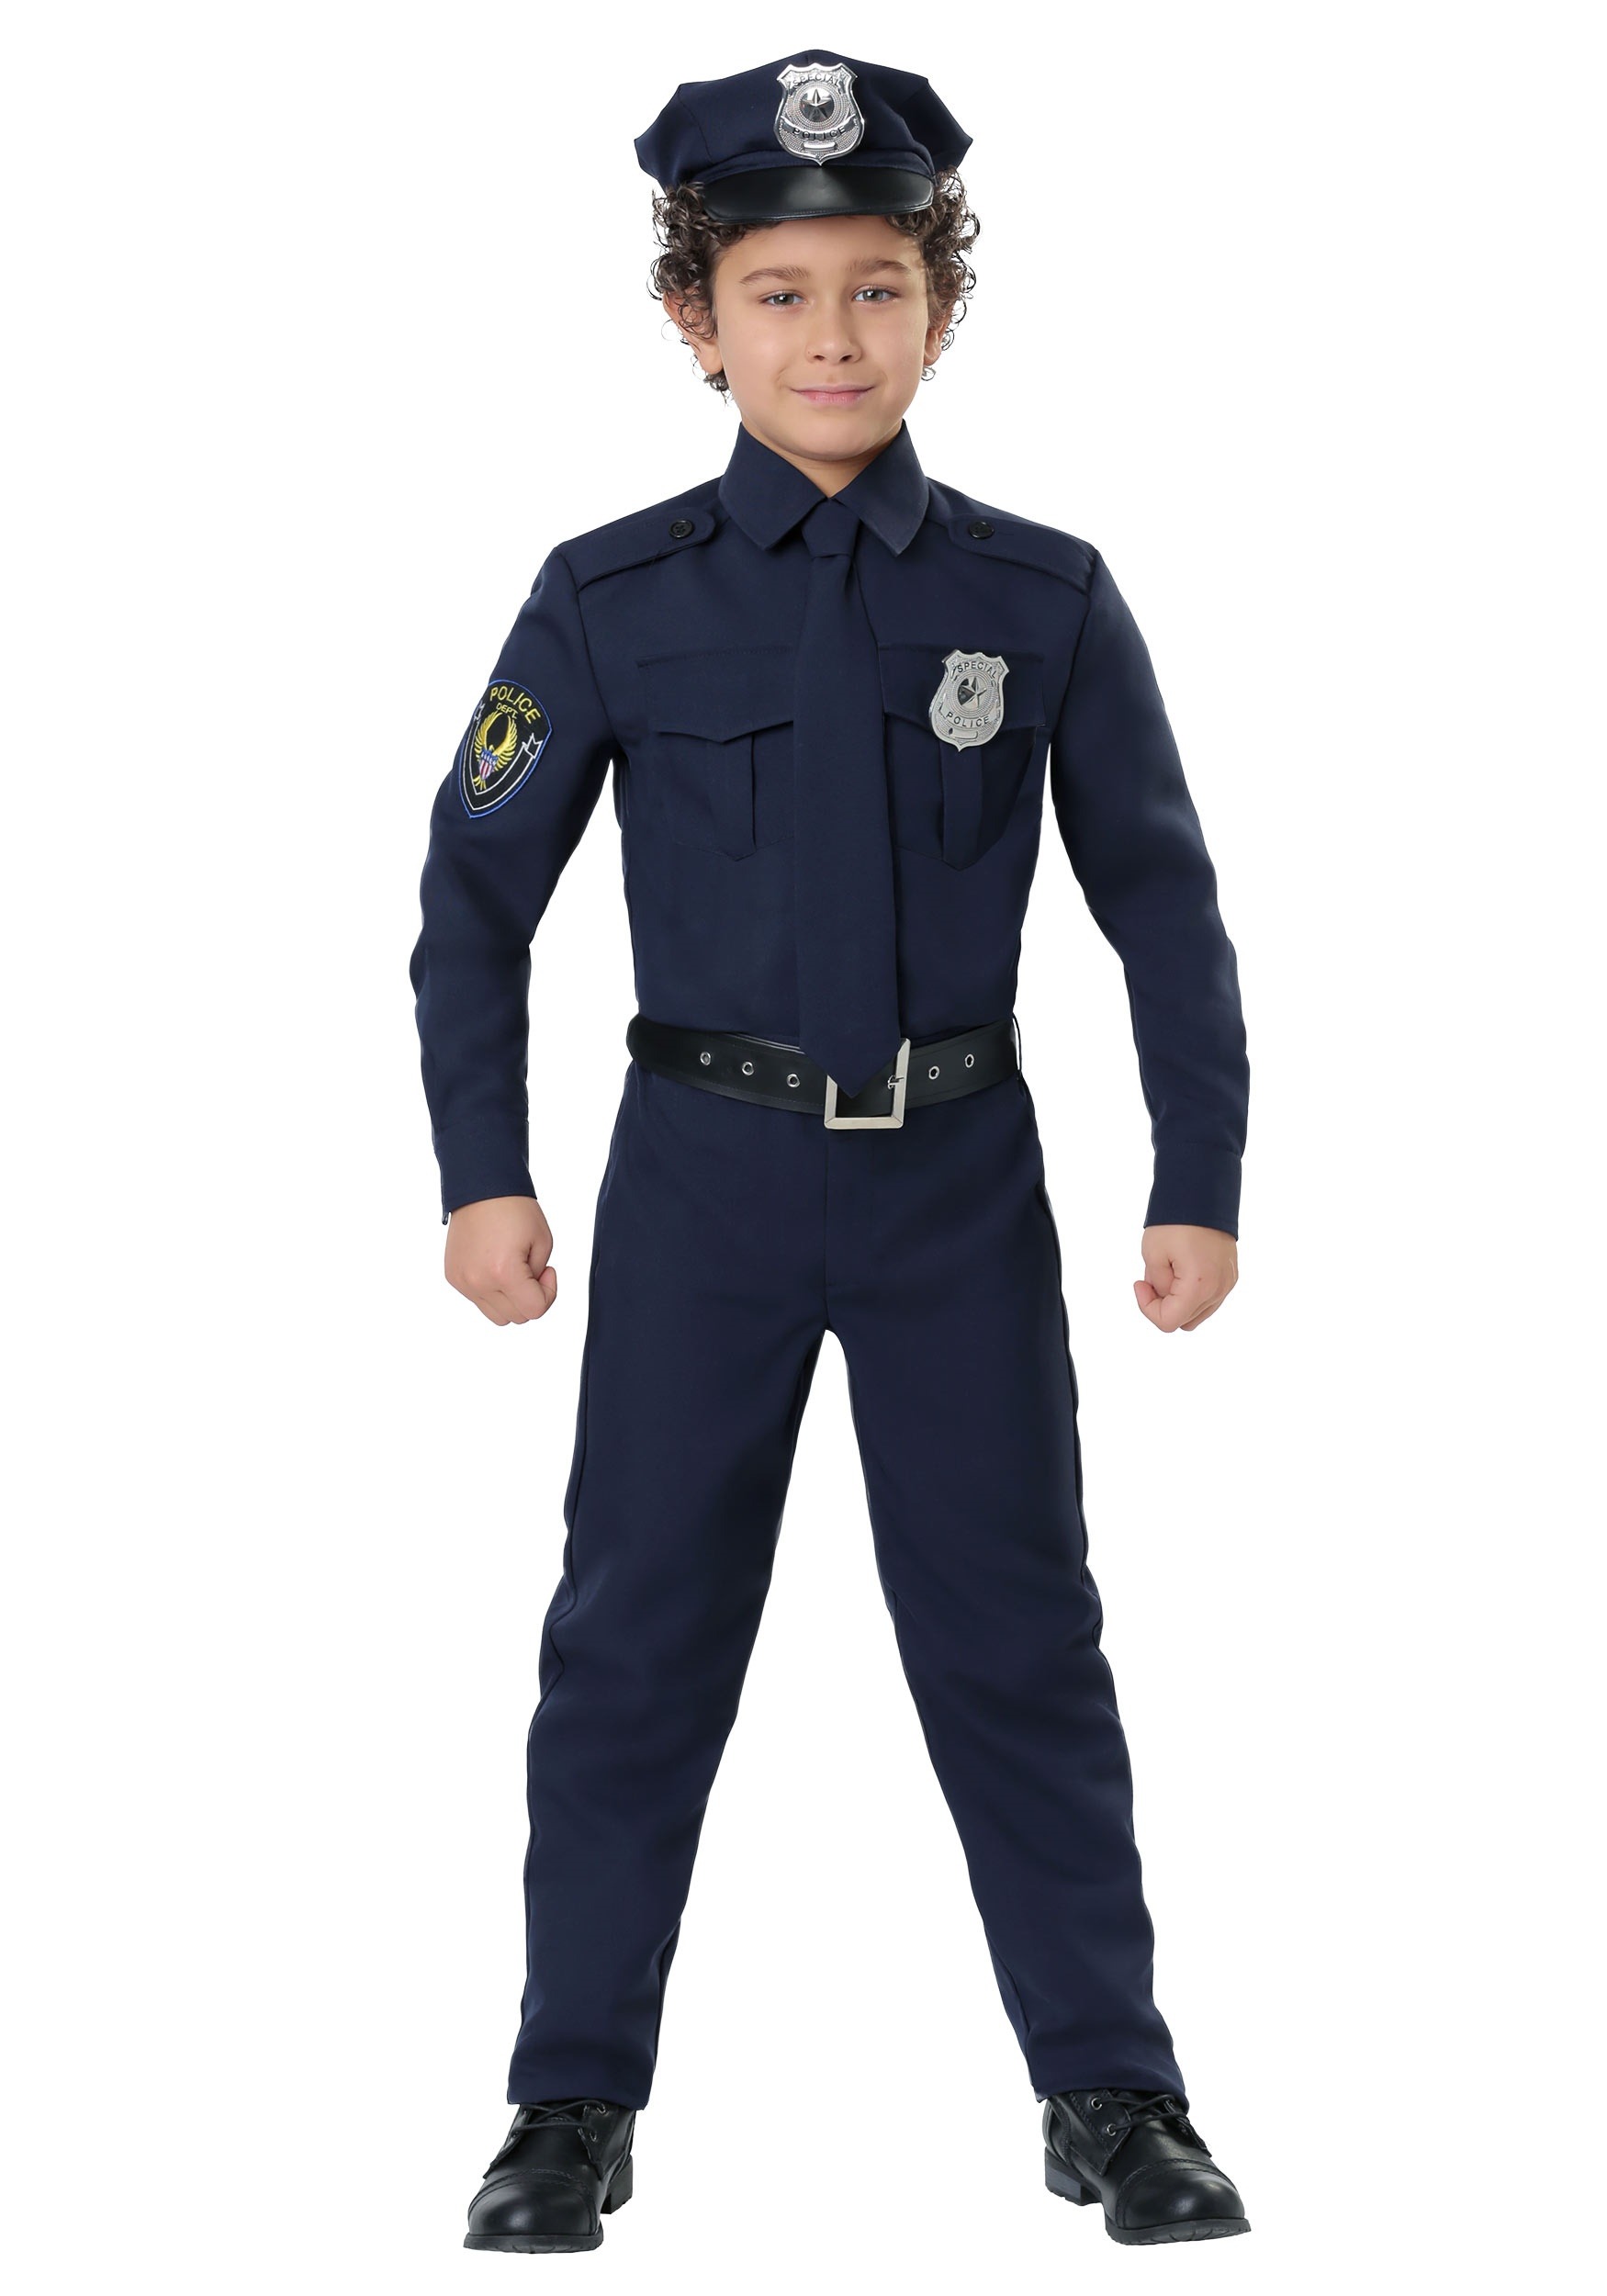 Child Police Officer Costume , Kid's Police Halloween Costumes